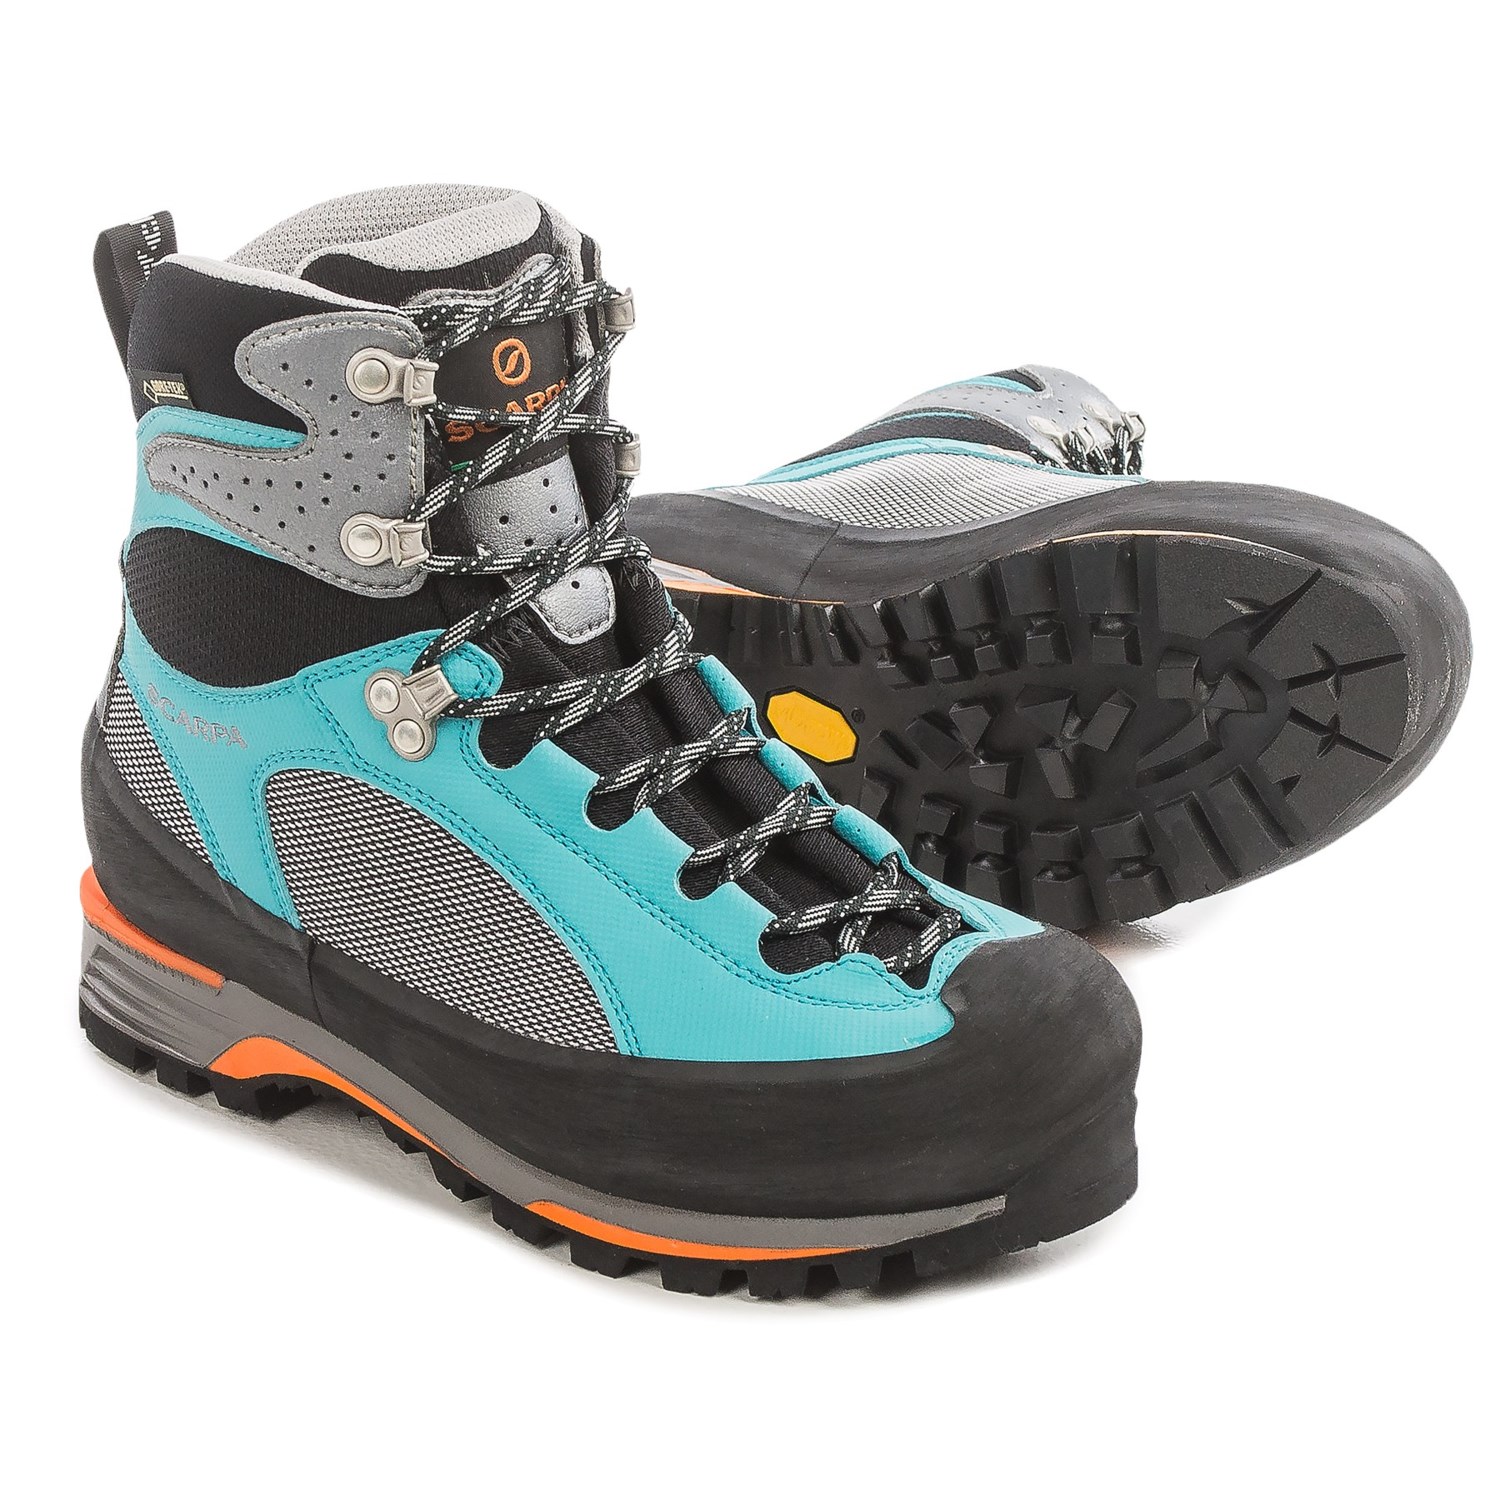 Scarpa Charmoz Pro Gore-Tex® Mountaineering Boots (For Women) - Save 63%